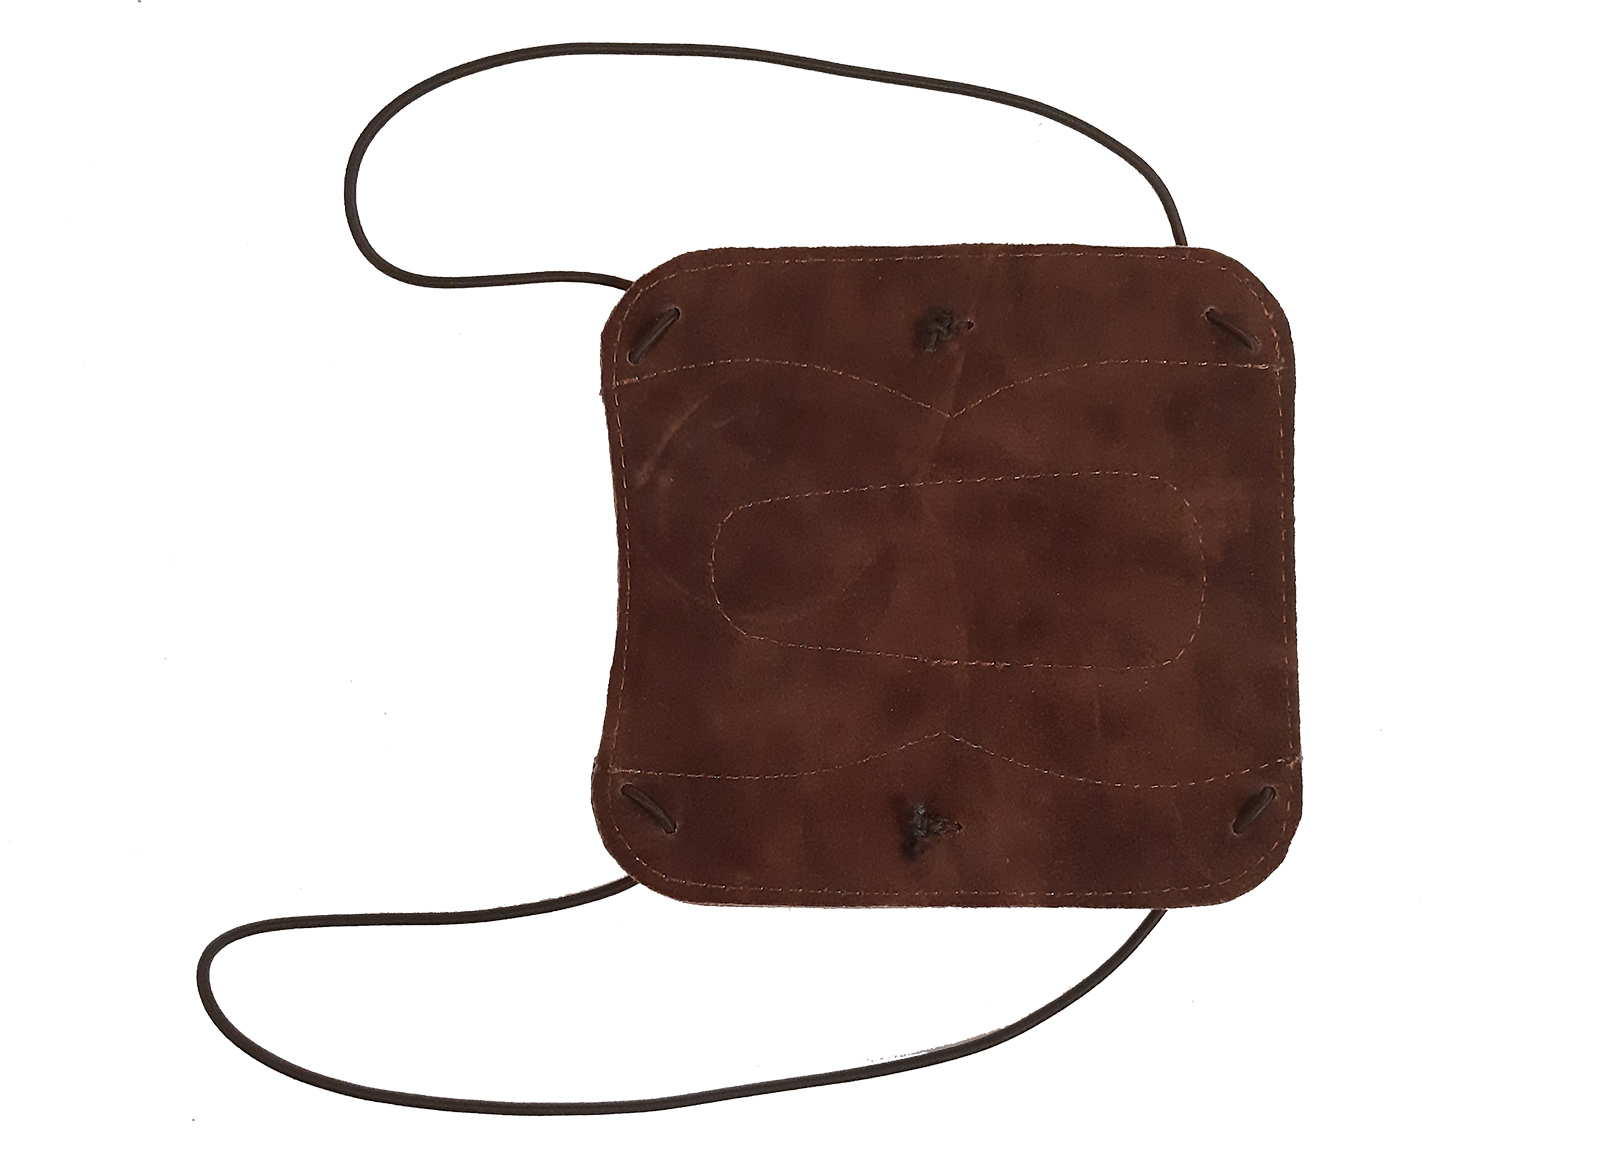 ALPEN ARCHERY TRADITIONAL ARMGUARD IN LIGHT and DARK BROWN LEATHER